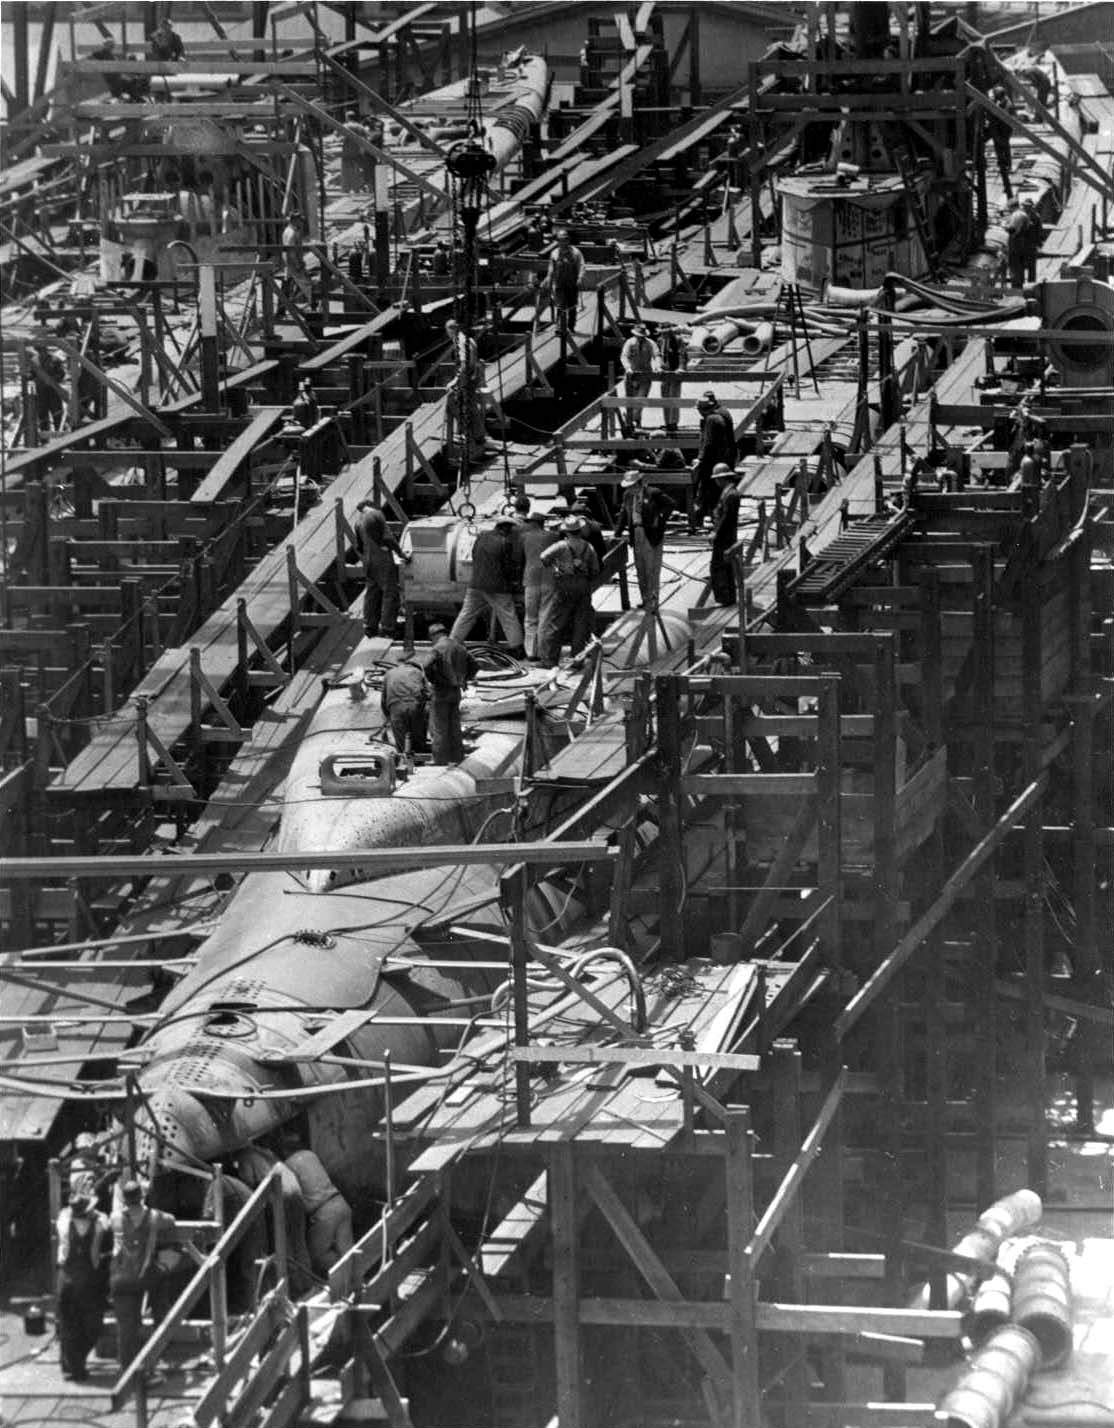 Tang (left) and Tilefish (right) under construction at Mare Island Navy Yard, Vallejo, California, United States, 1 Jul 1943, photo 1 of 3